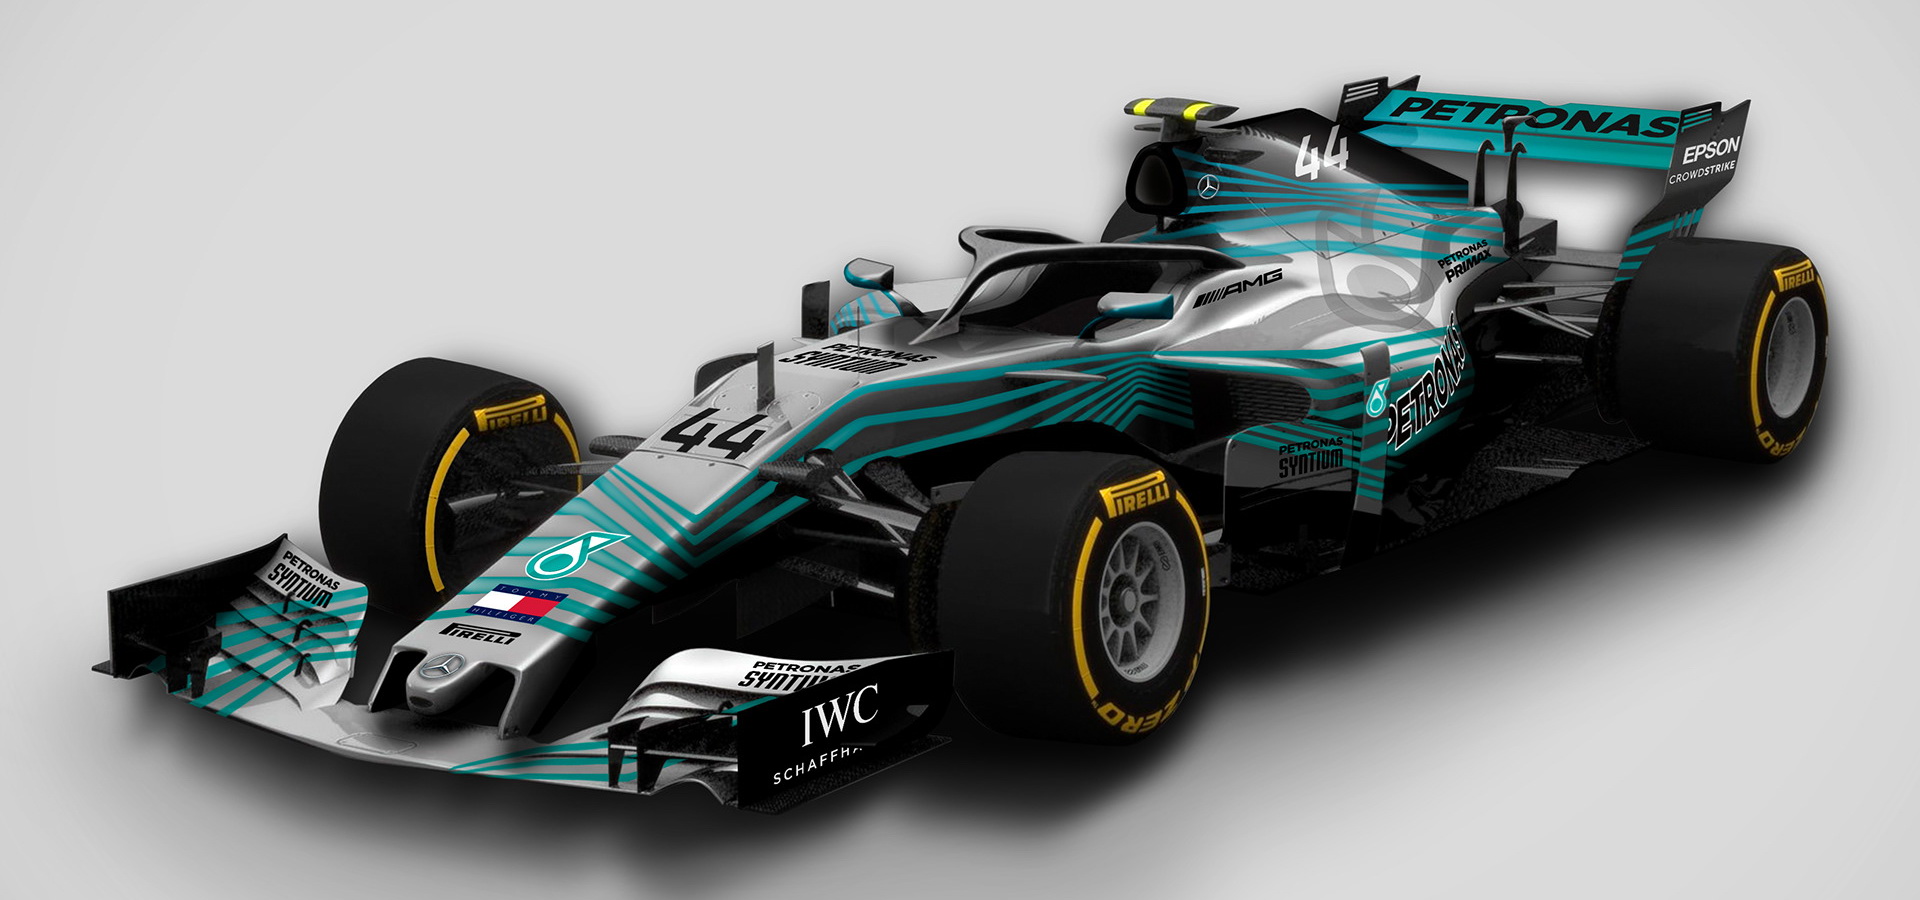 Check Out These Awesome Alternate F1 Liveries For 2019 ...